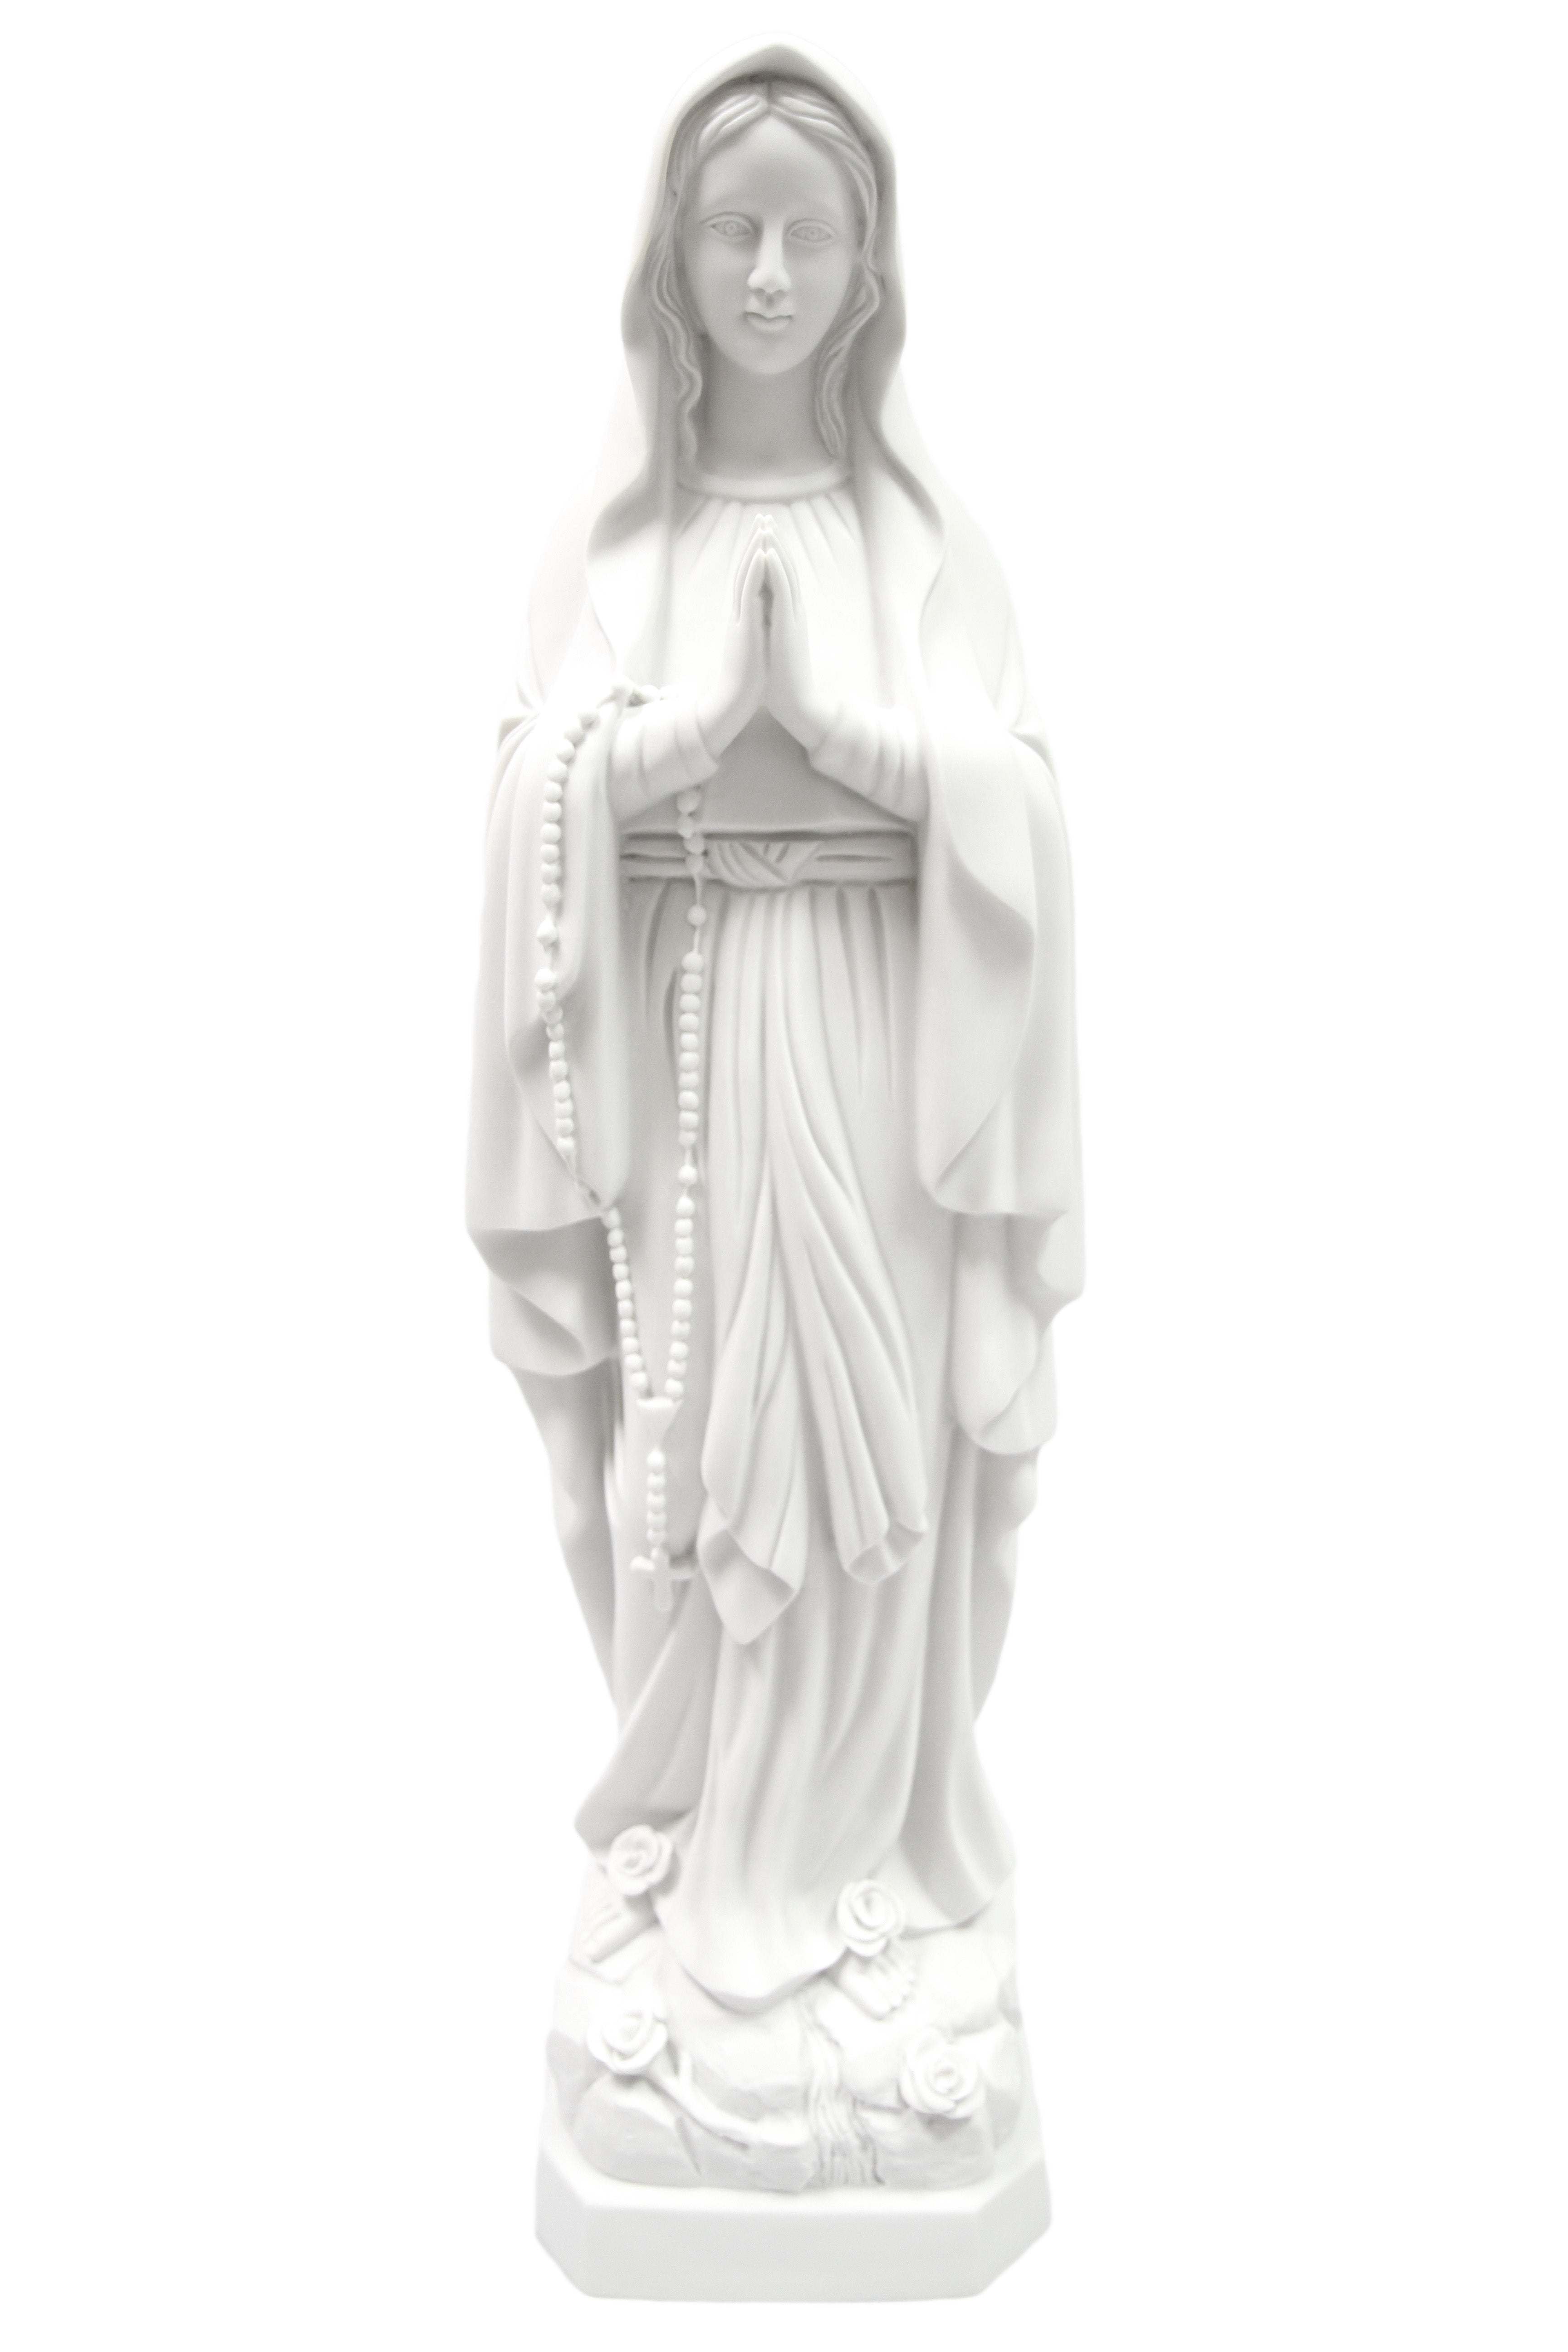 27 Inch Our Lady of Lourdes Statue Vittoria Collection Made in Italy Catholic